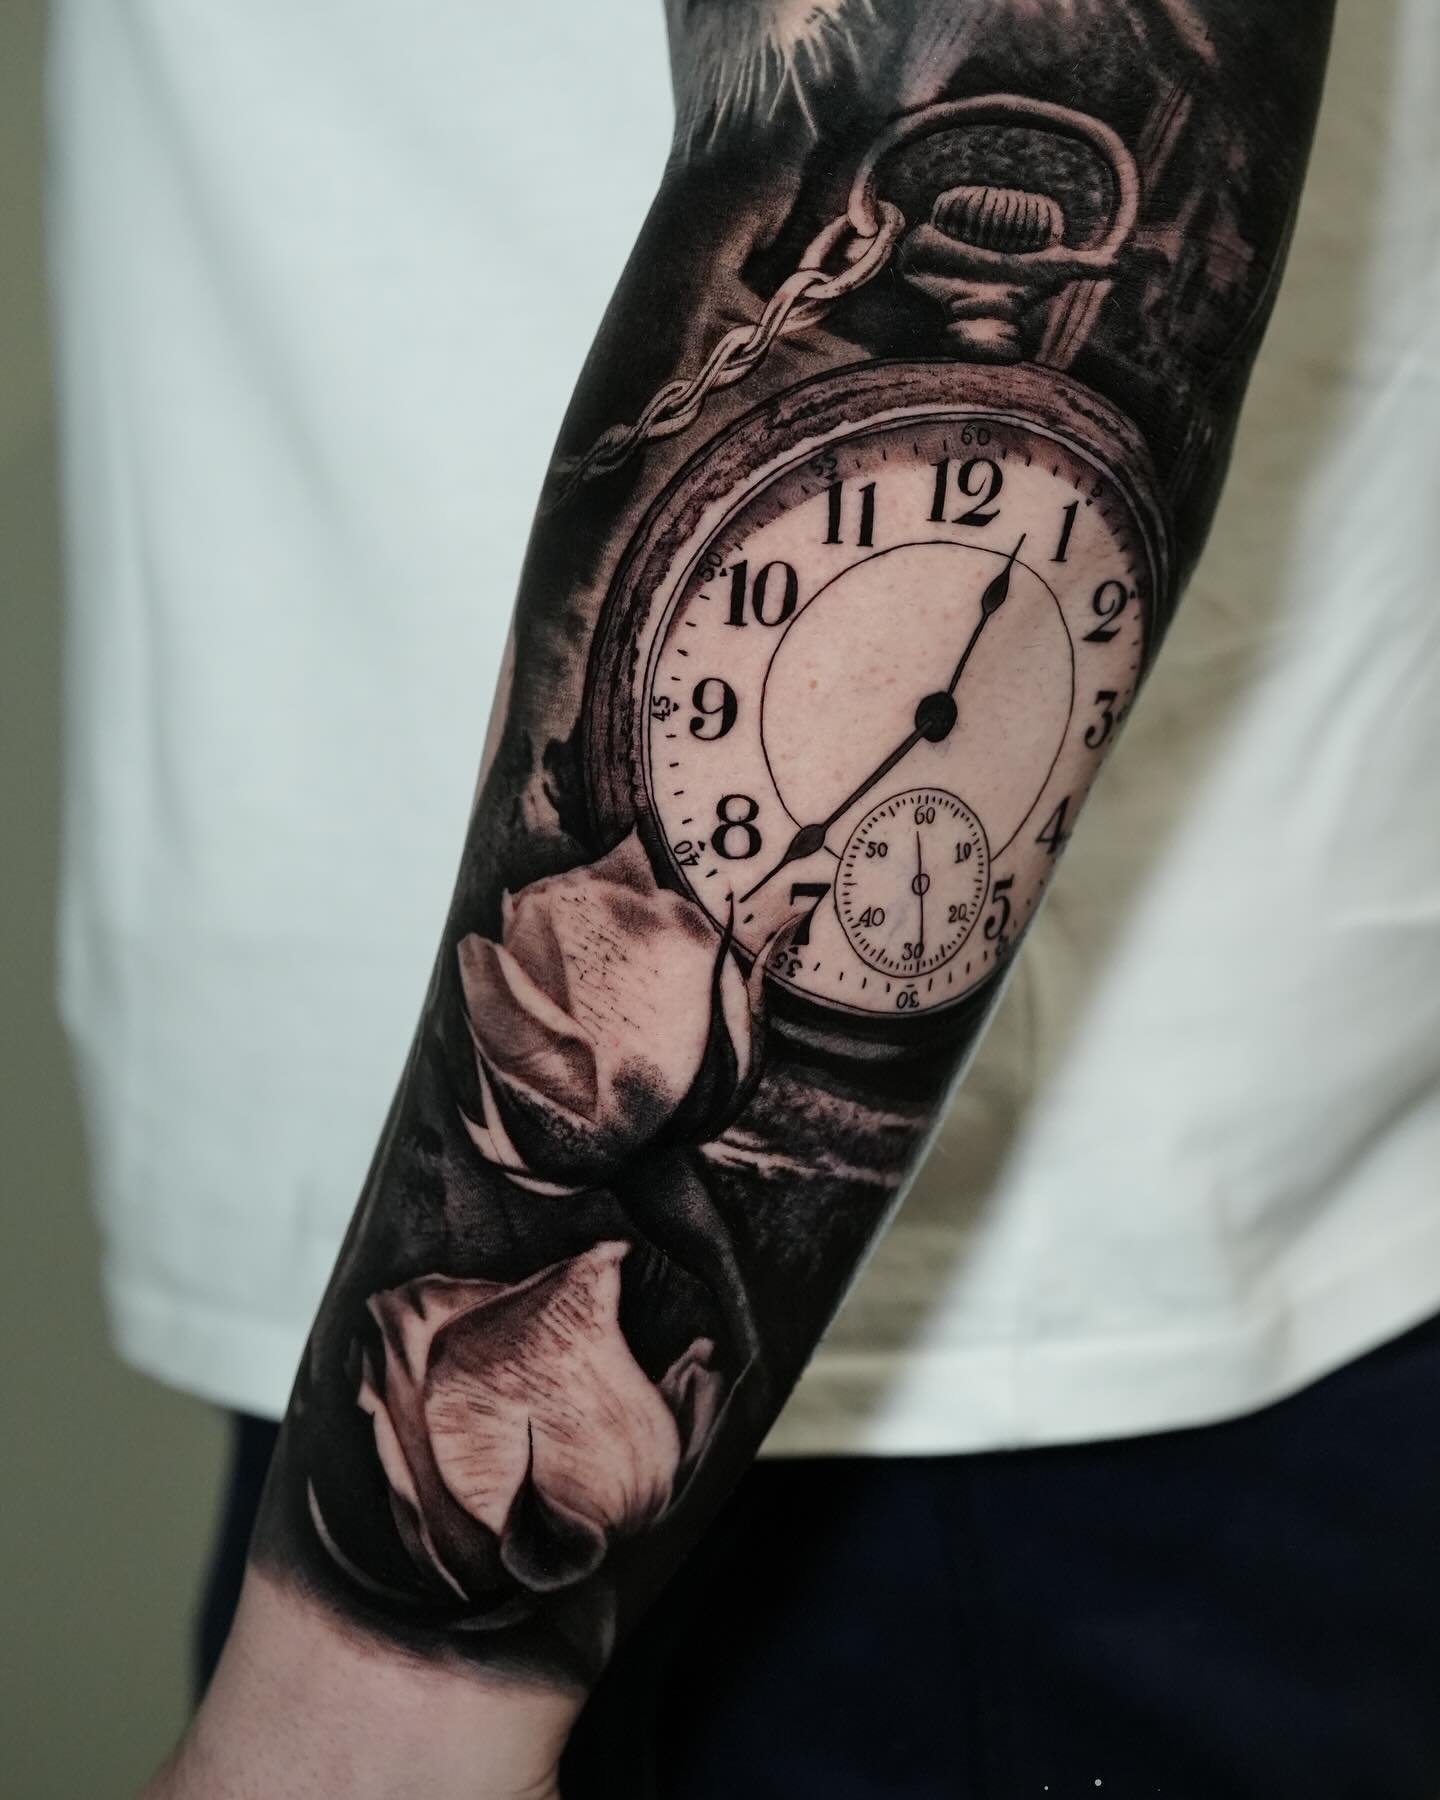 - Pocket watch and roses - 
&bull;
- Booking at : info@roudolfdimovart.com
&bull;
#tattoo #londontattoo #londontattooartist #londontattoostudio #londoncity #uktattoo #realismtattoo #pocketwatch #rose